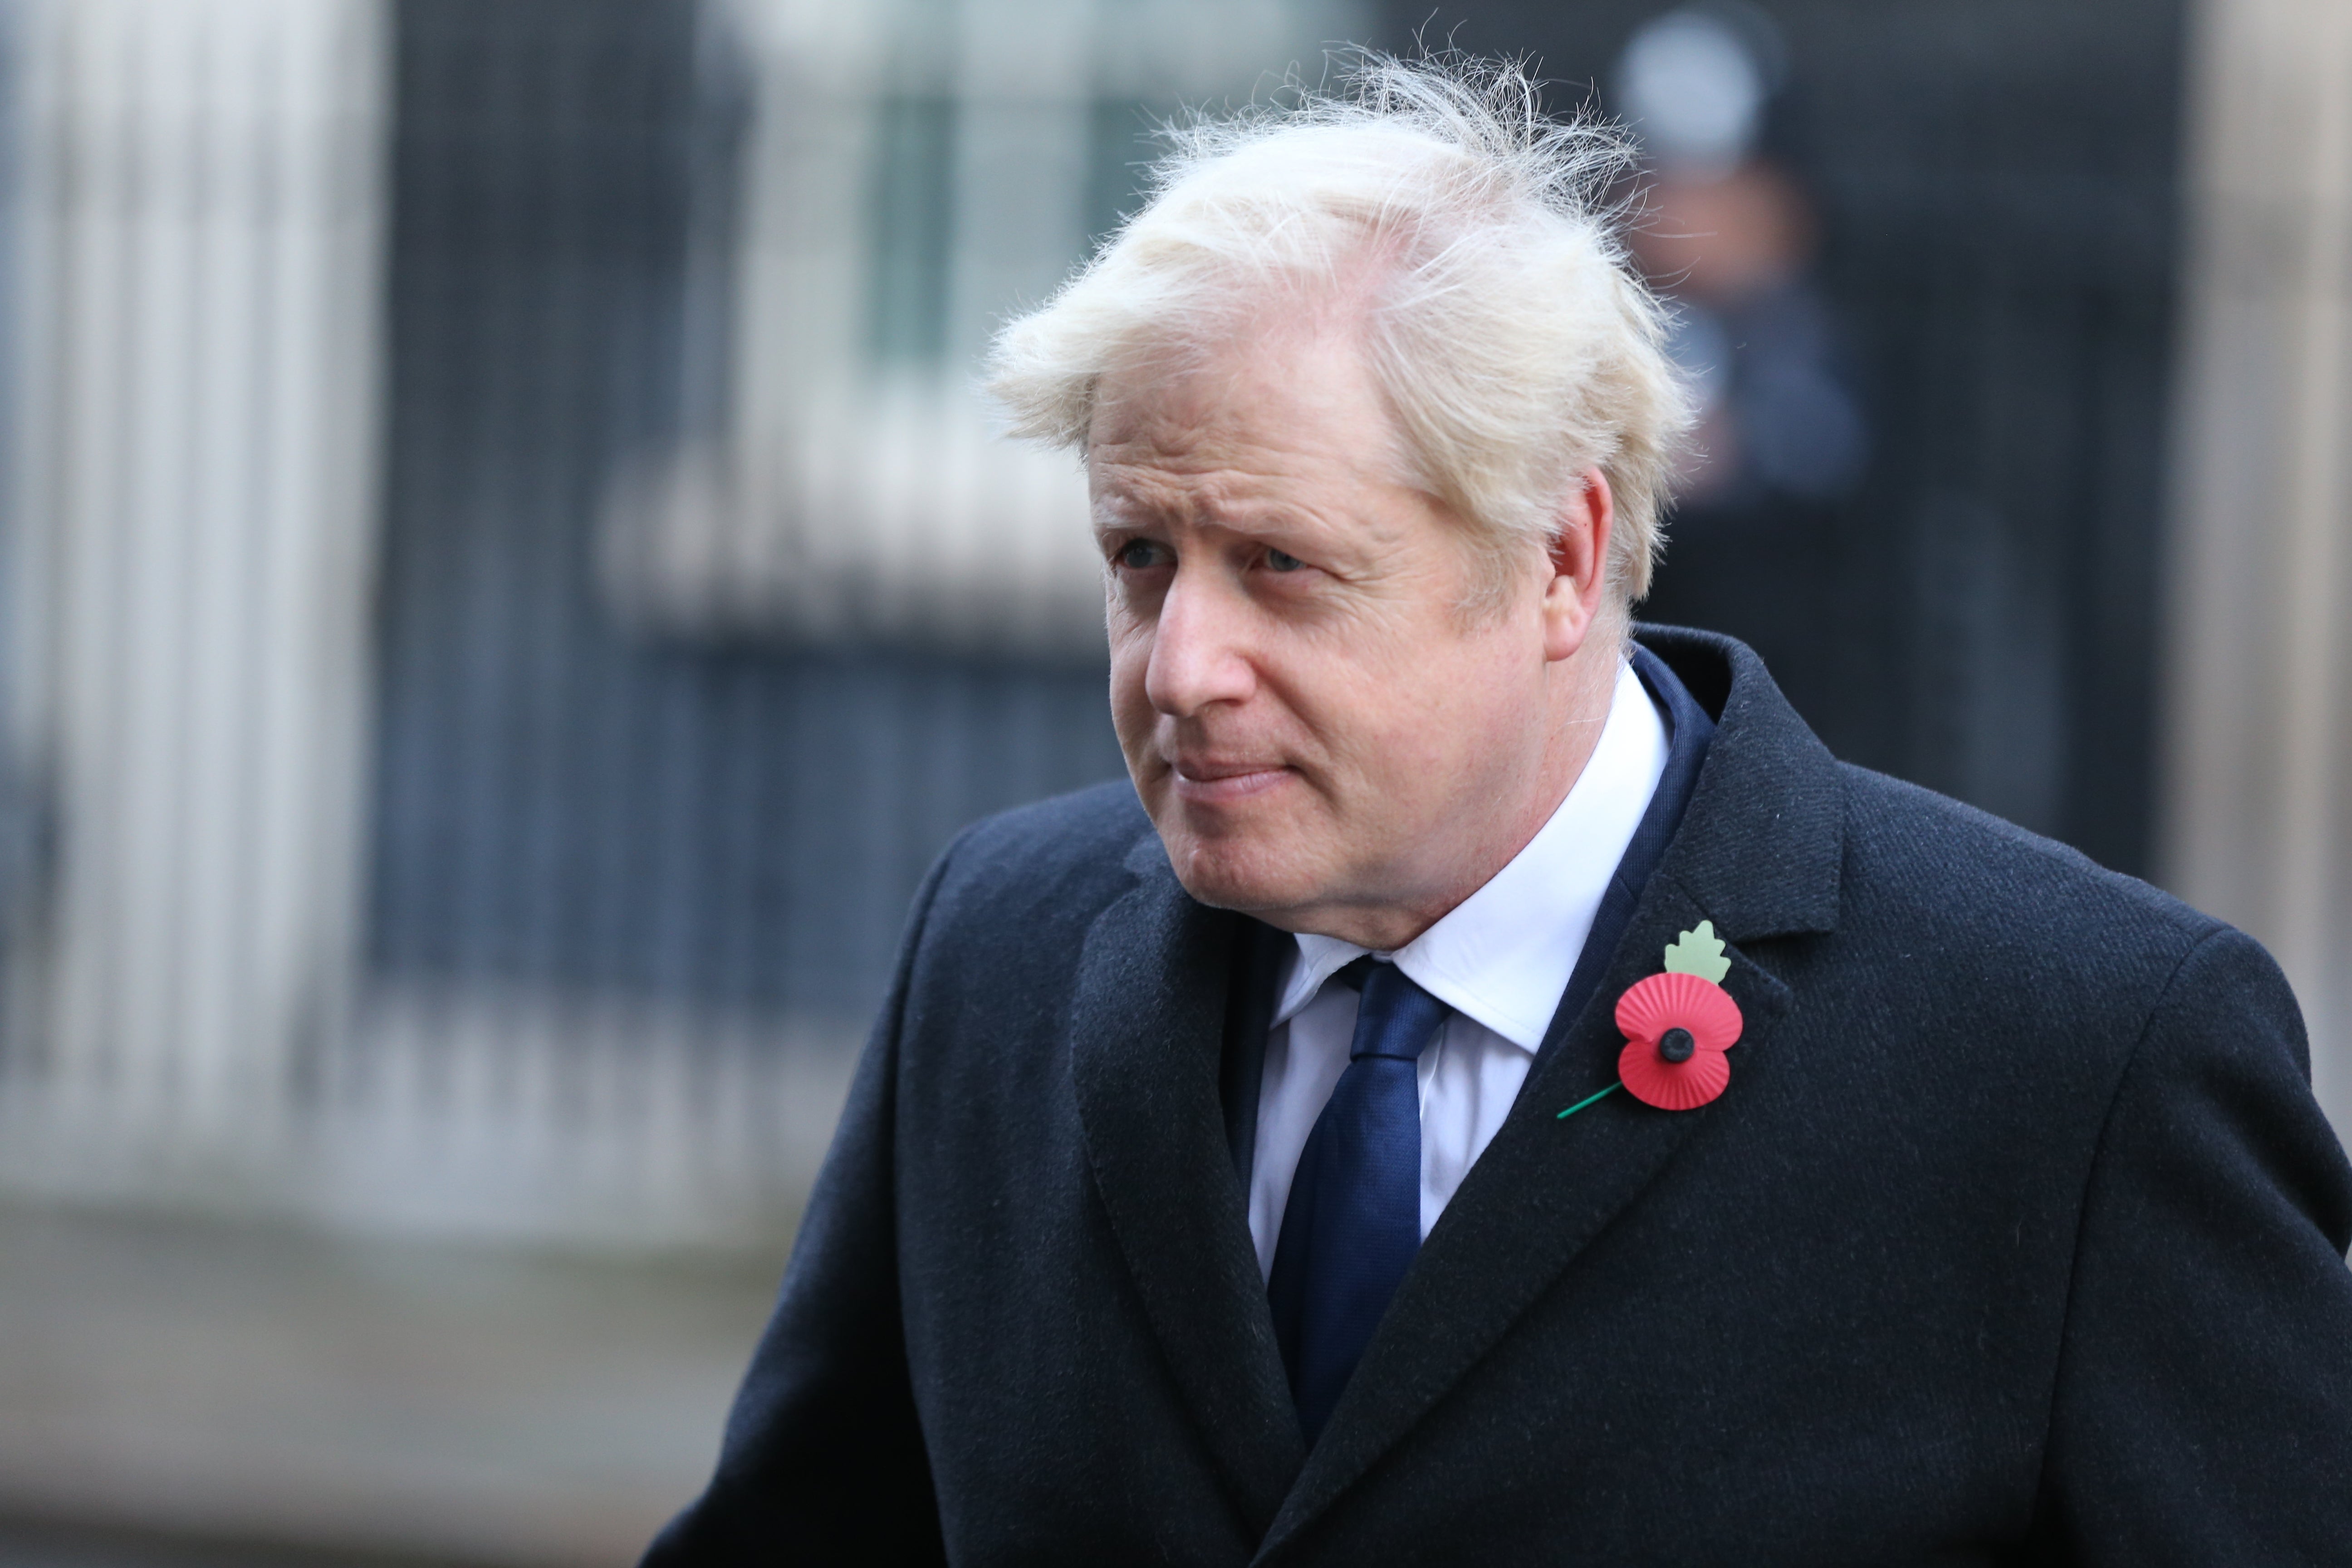 Boris Johnson leaves 10 Downing Street to attend the Remembrance Sunday ceremony in Whitehall